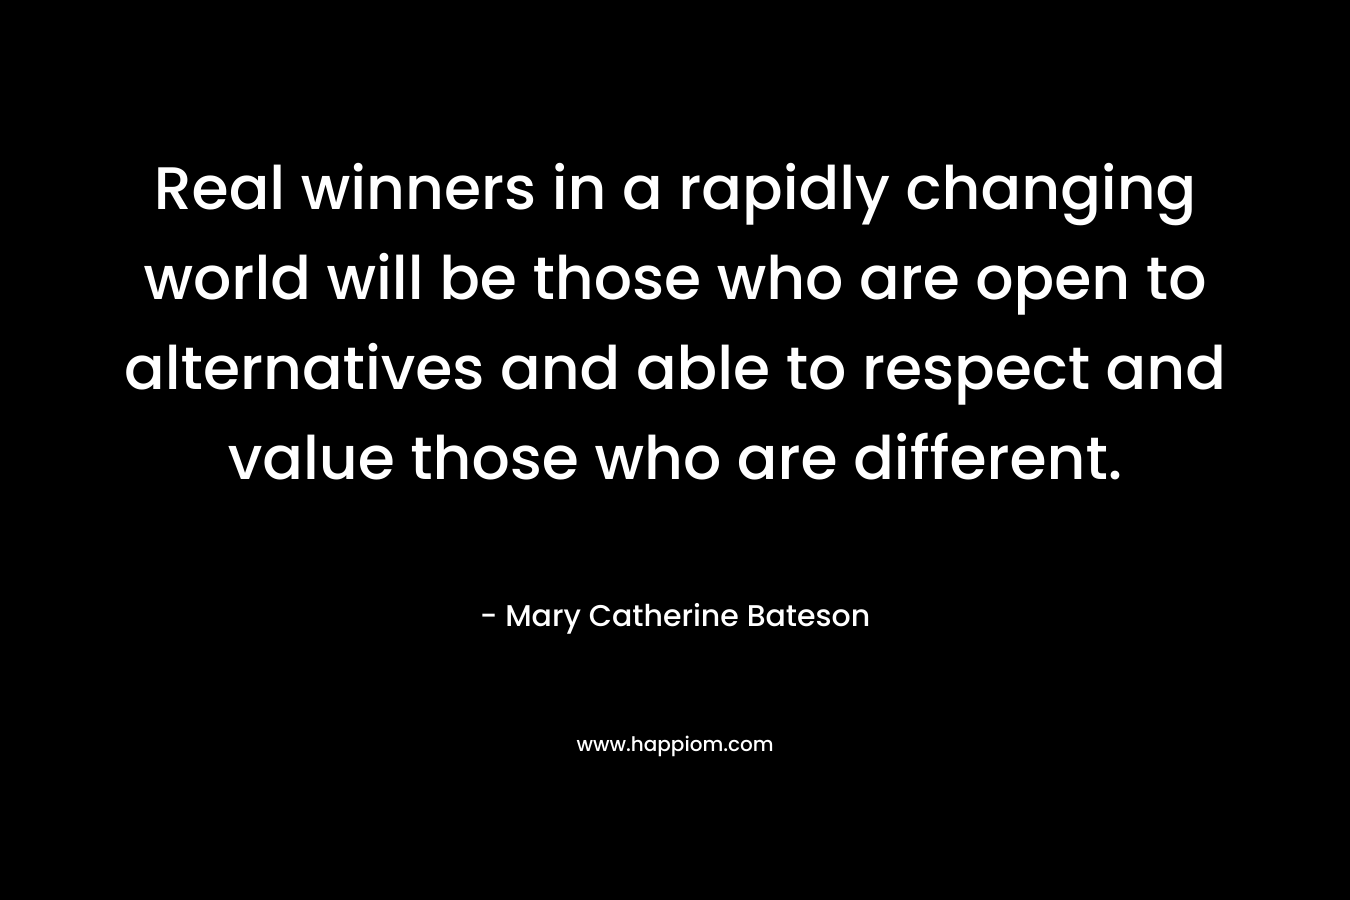 Real winners in a rapidly changing world will be those who are open to alternatives and able to respect and value those who are different.